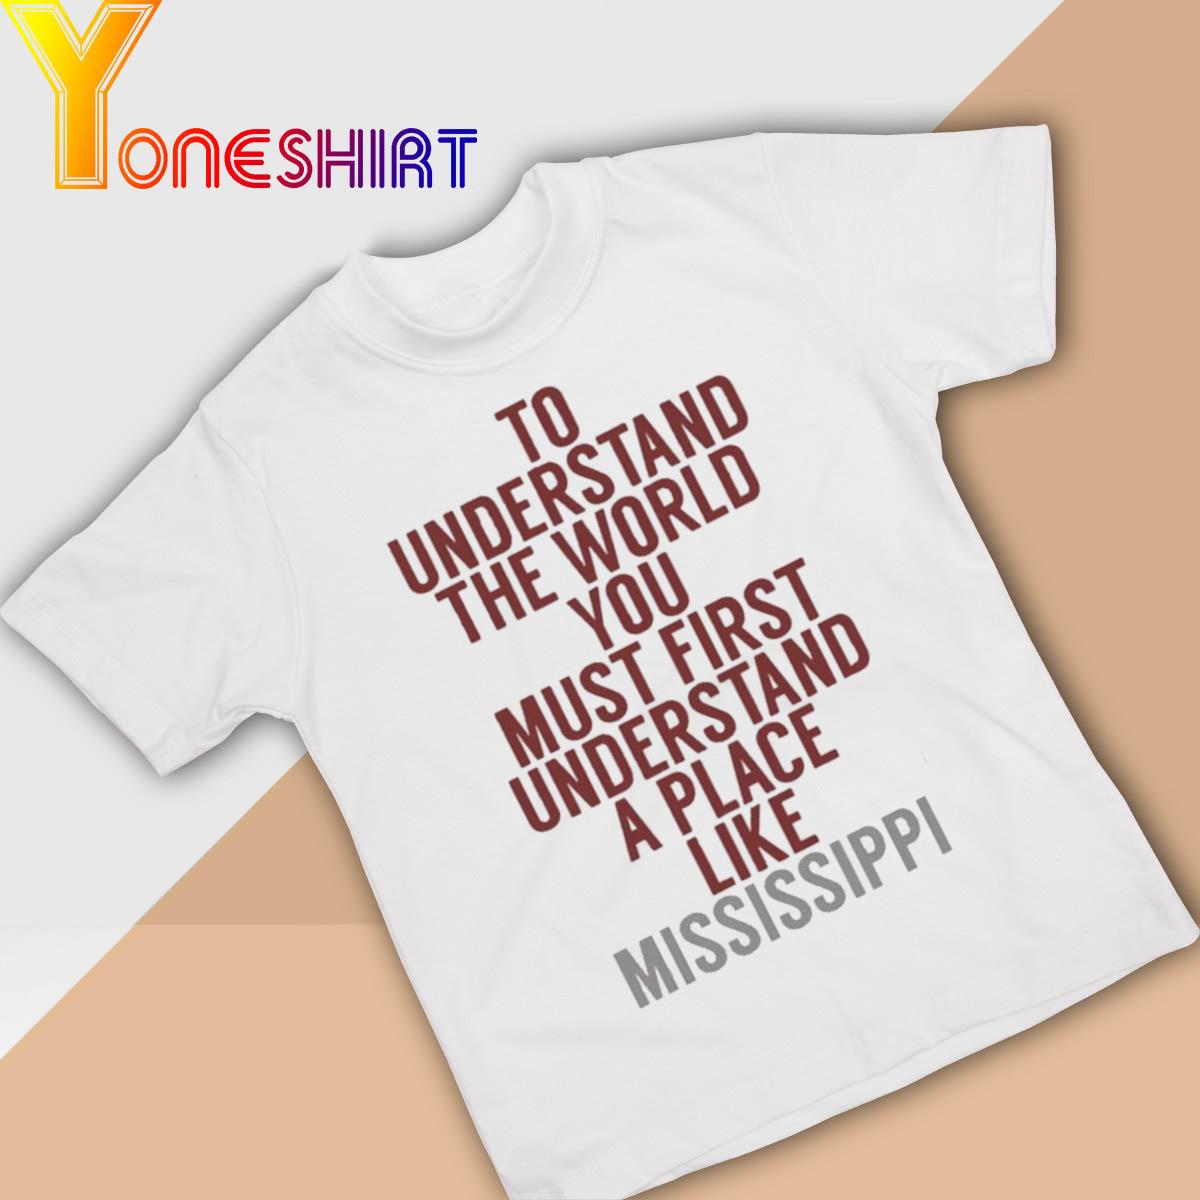 Mississippi State Bulldogs To Understand the World You Must first Understand a Place Like Mississippi shirt